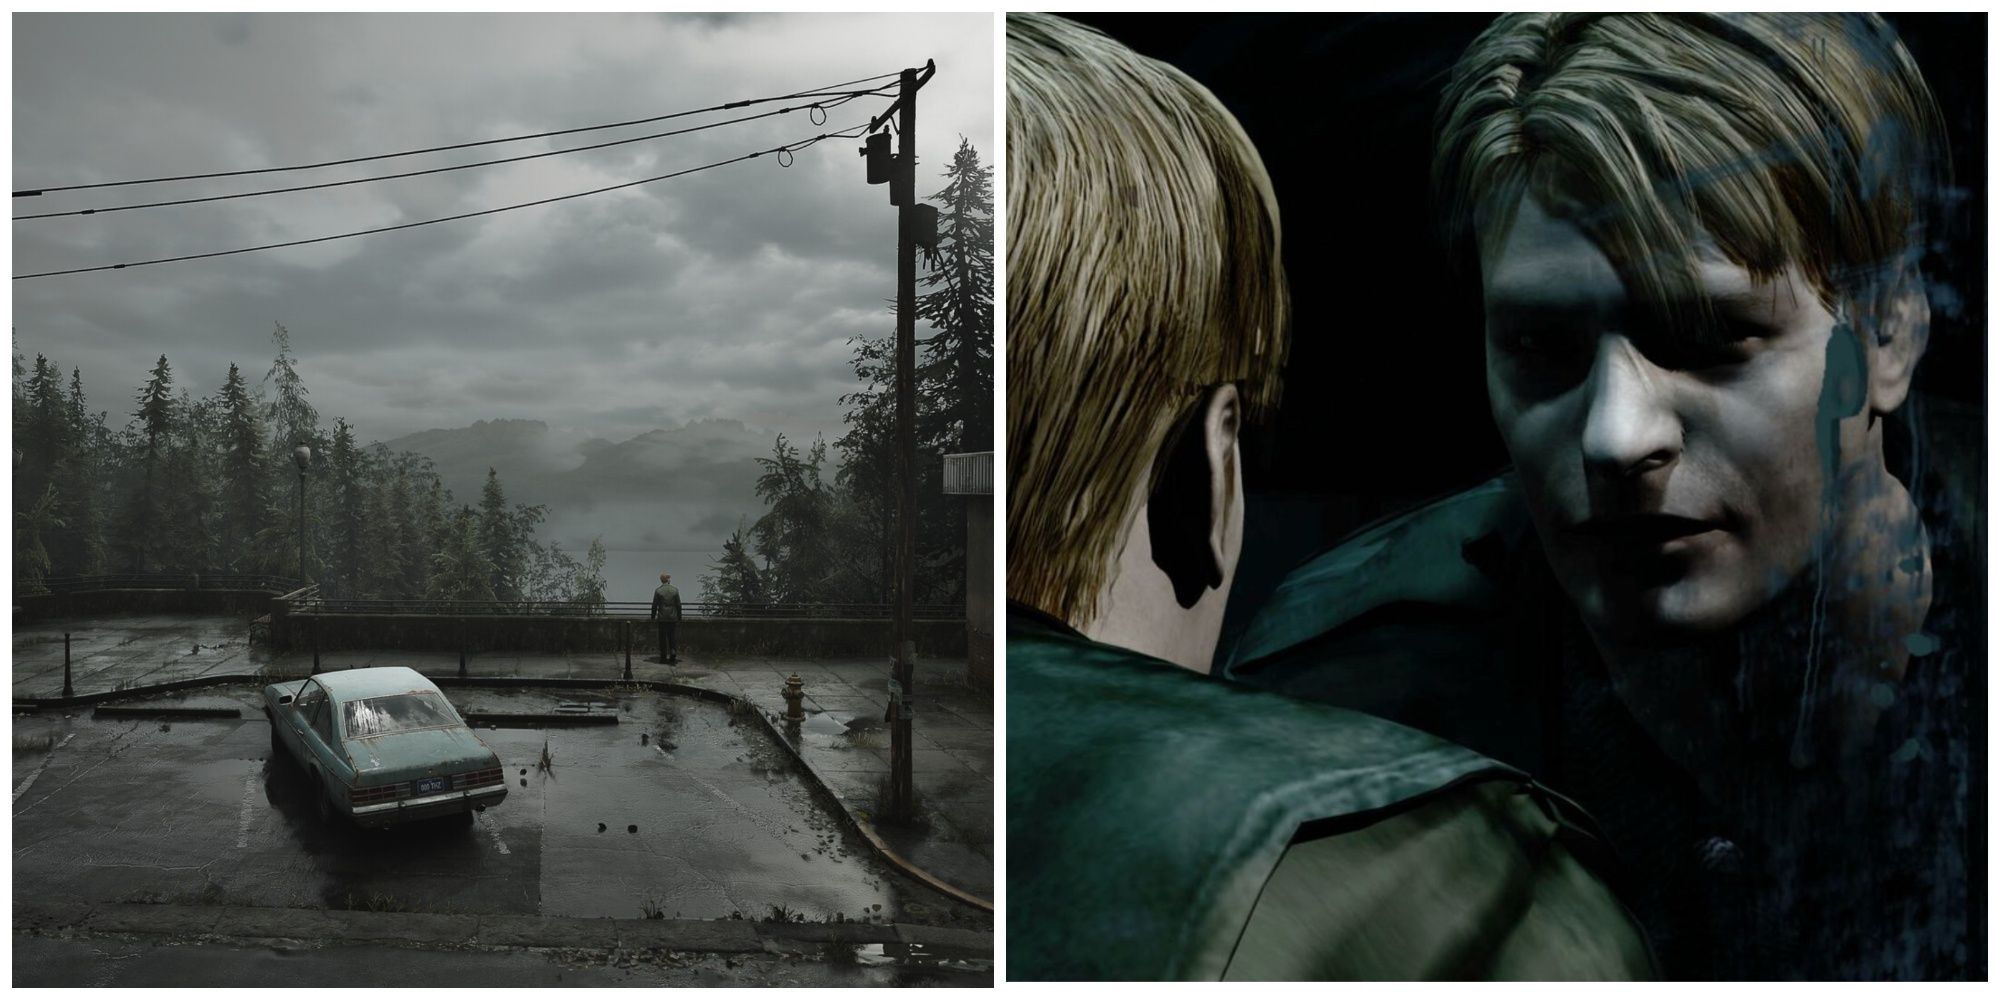 Silent Hill 2 Remake Release Date, Platforms, System Requirements